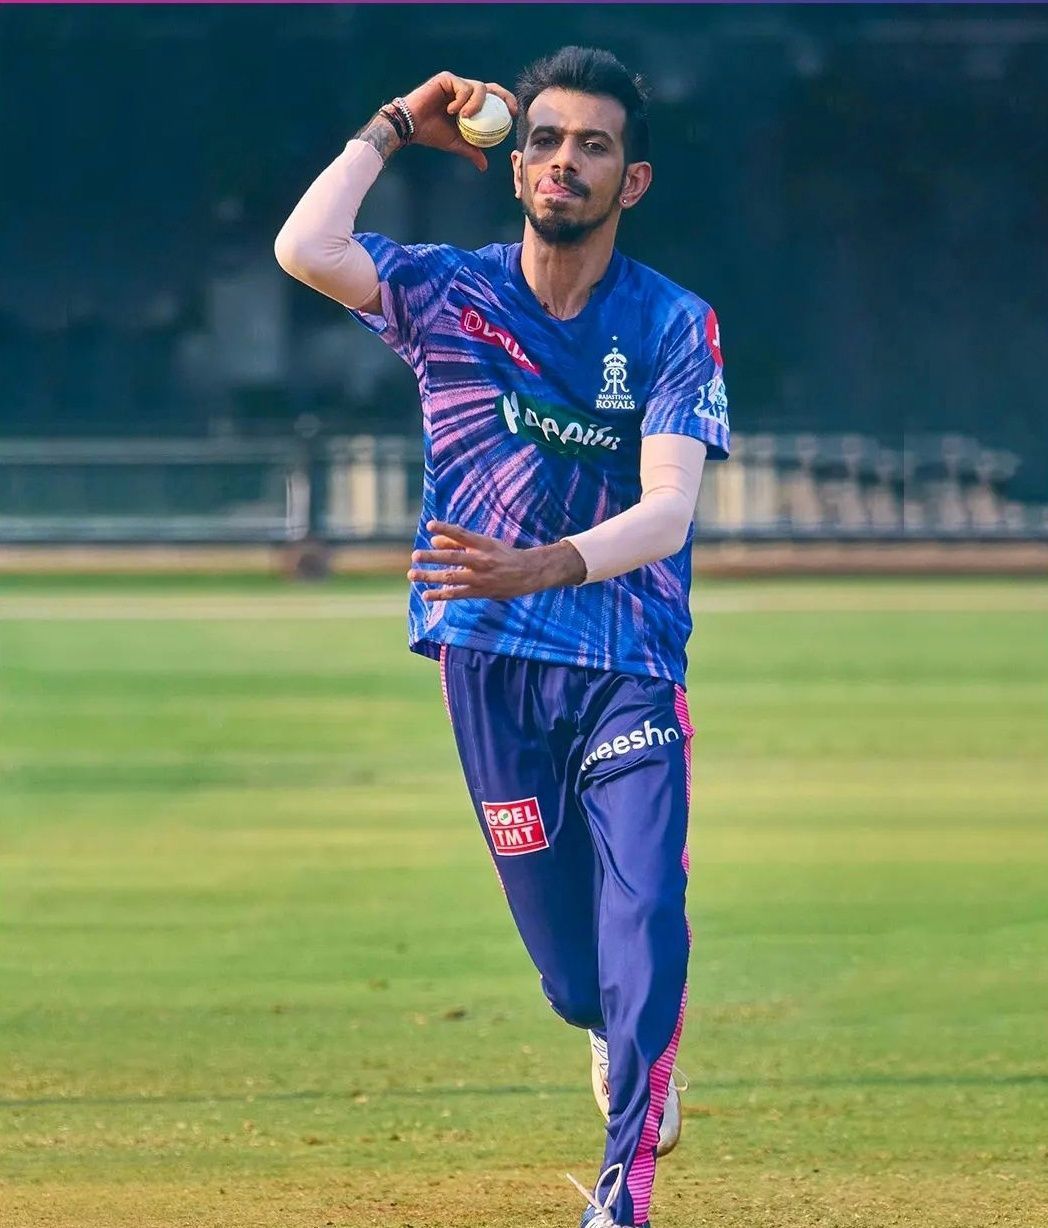 Yuzvendra Chahal is the current Purple Cap holder with 12 wickets [P.C: Rajasthan Royals]